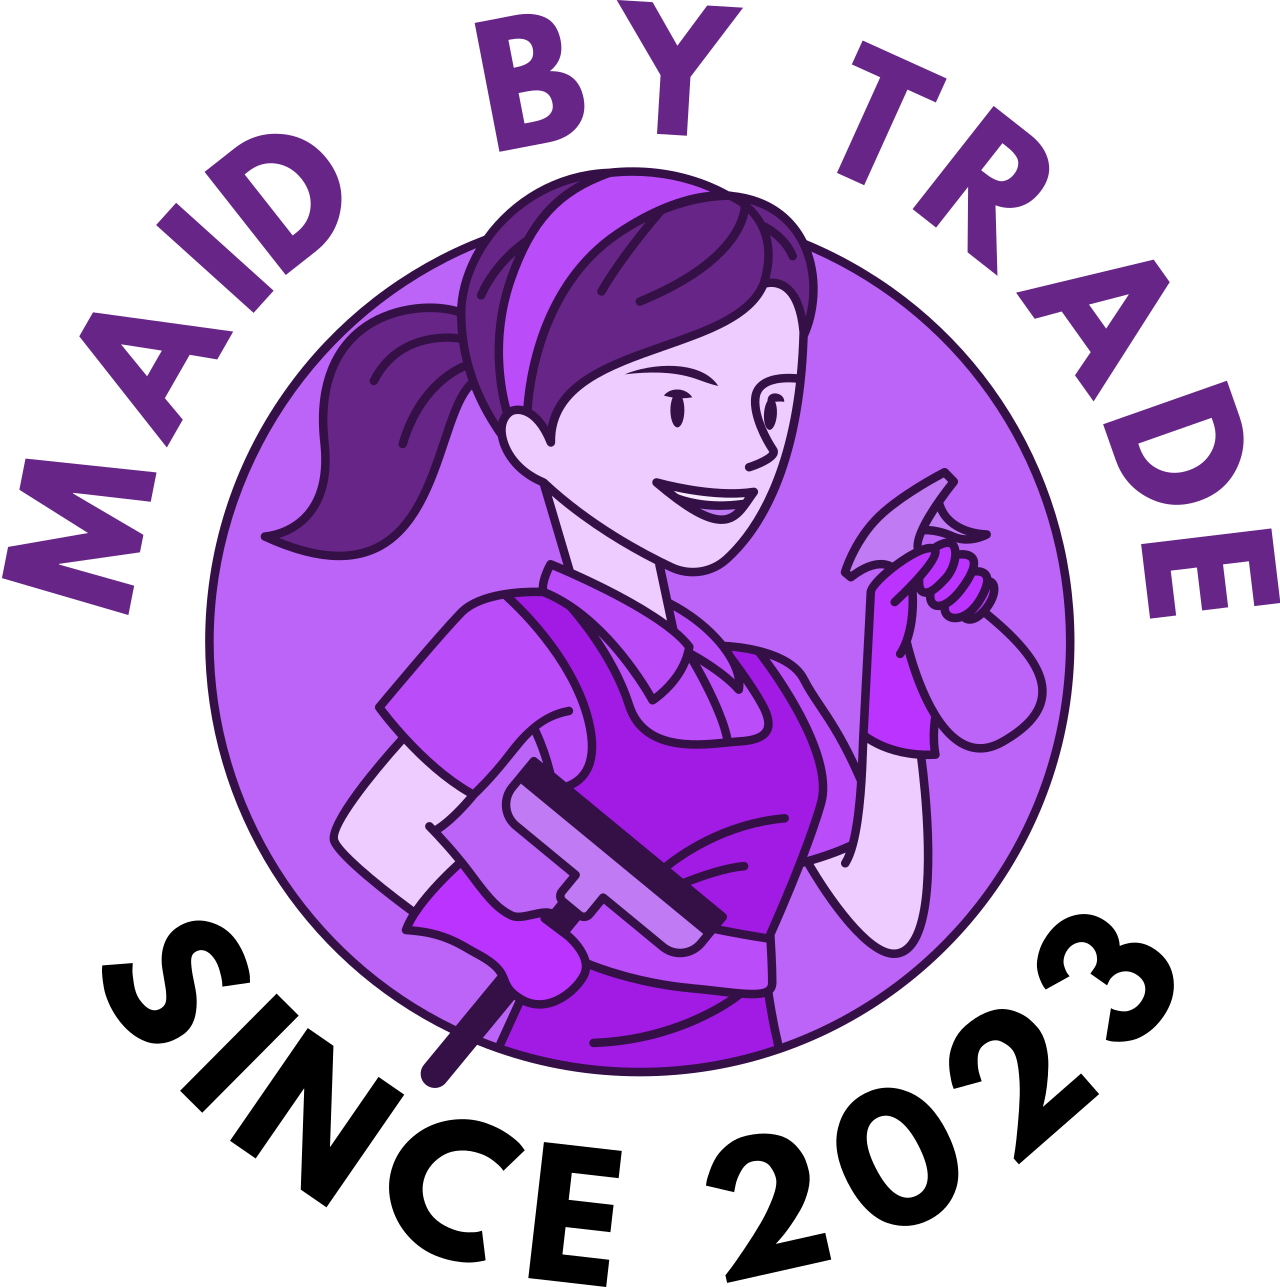 Maid By Trade's web page